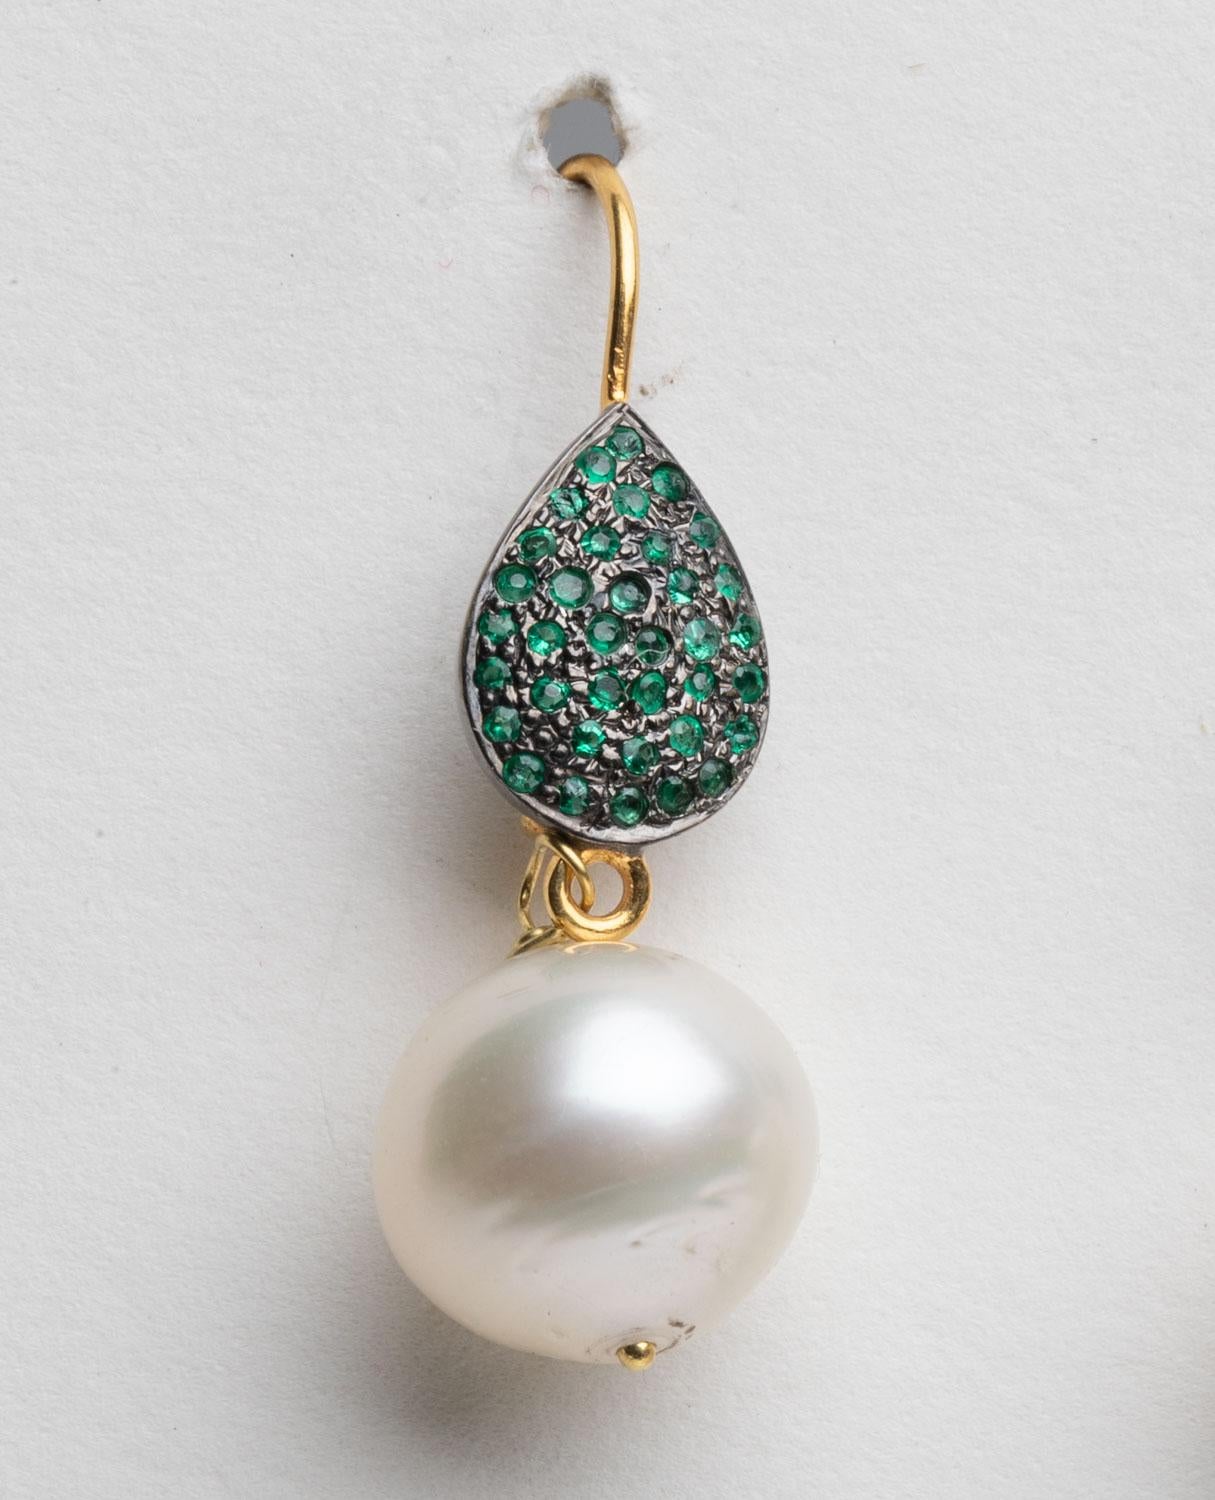 A fresh water pearl drop earring dangling from a pear-shaped French back earring wire with round, faceted emeralds in a pave` setting.  18K gold, for pierced ears.  By Deborah Lockhart Phillips